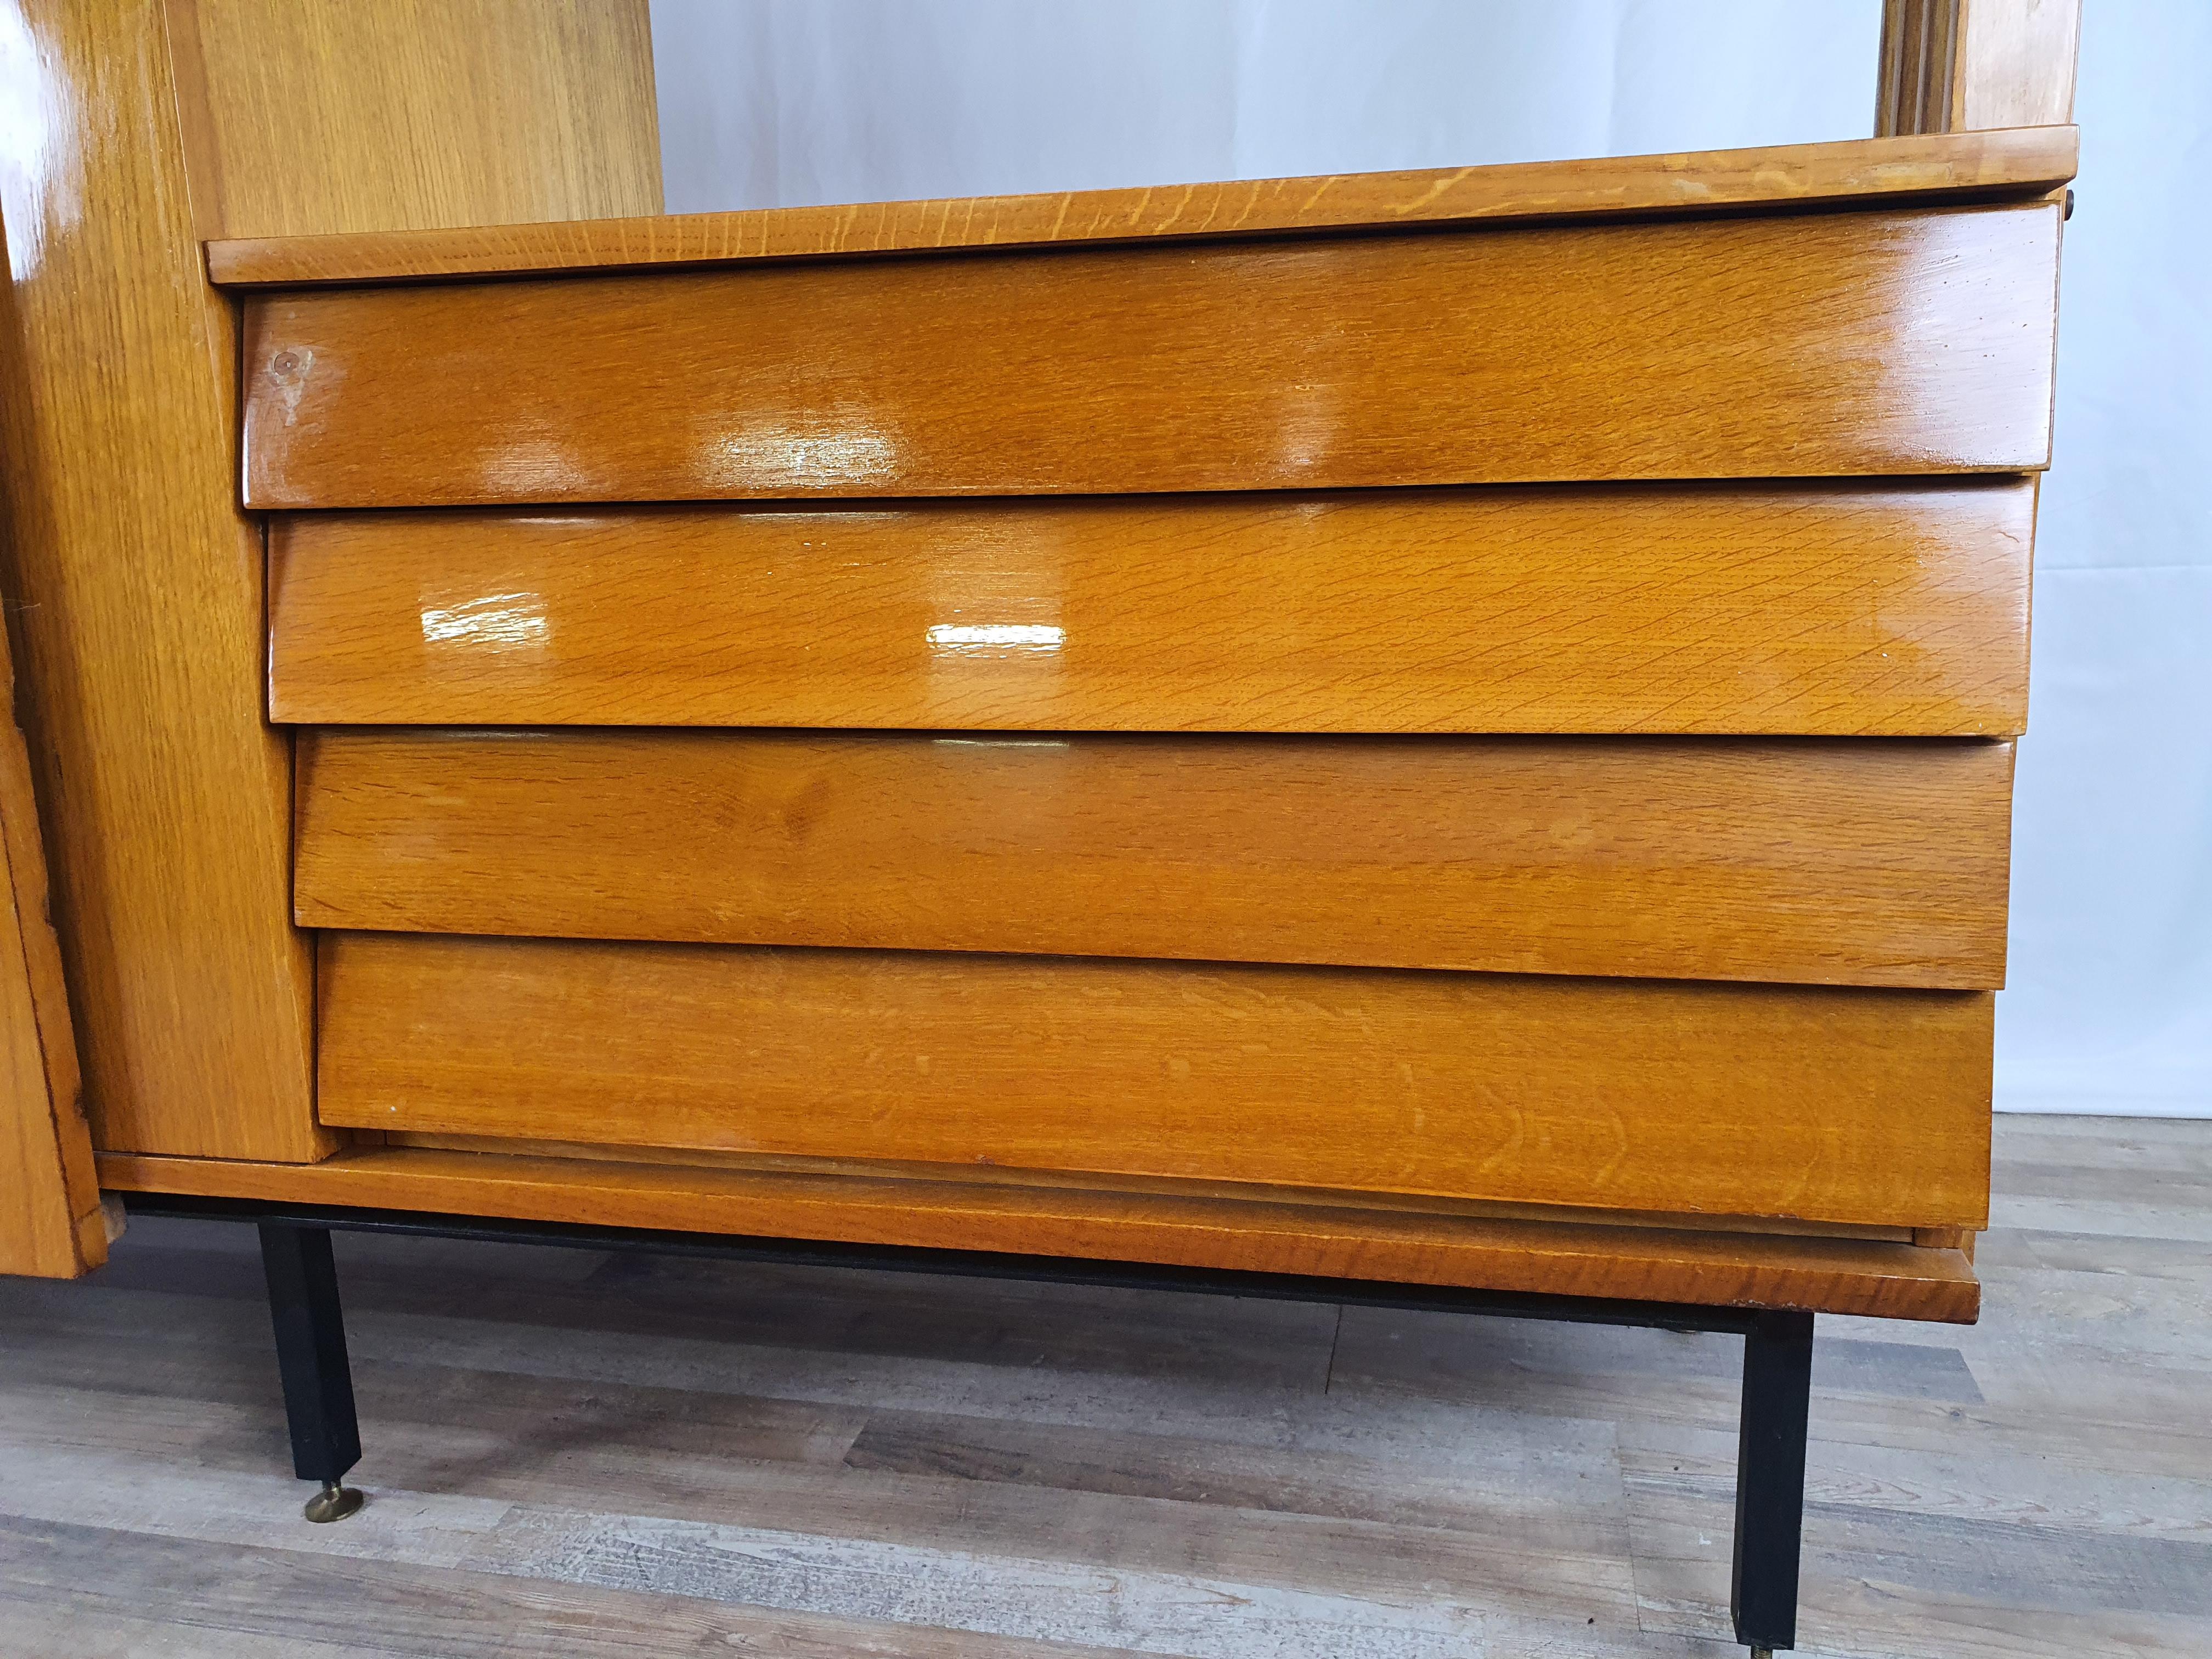 Milanese Bookcase Sideboard in Beech, 1950s For Sale 7